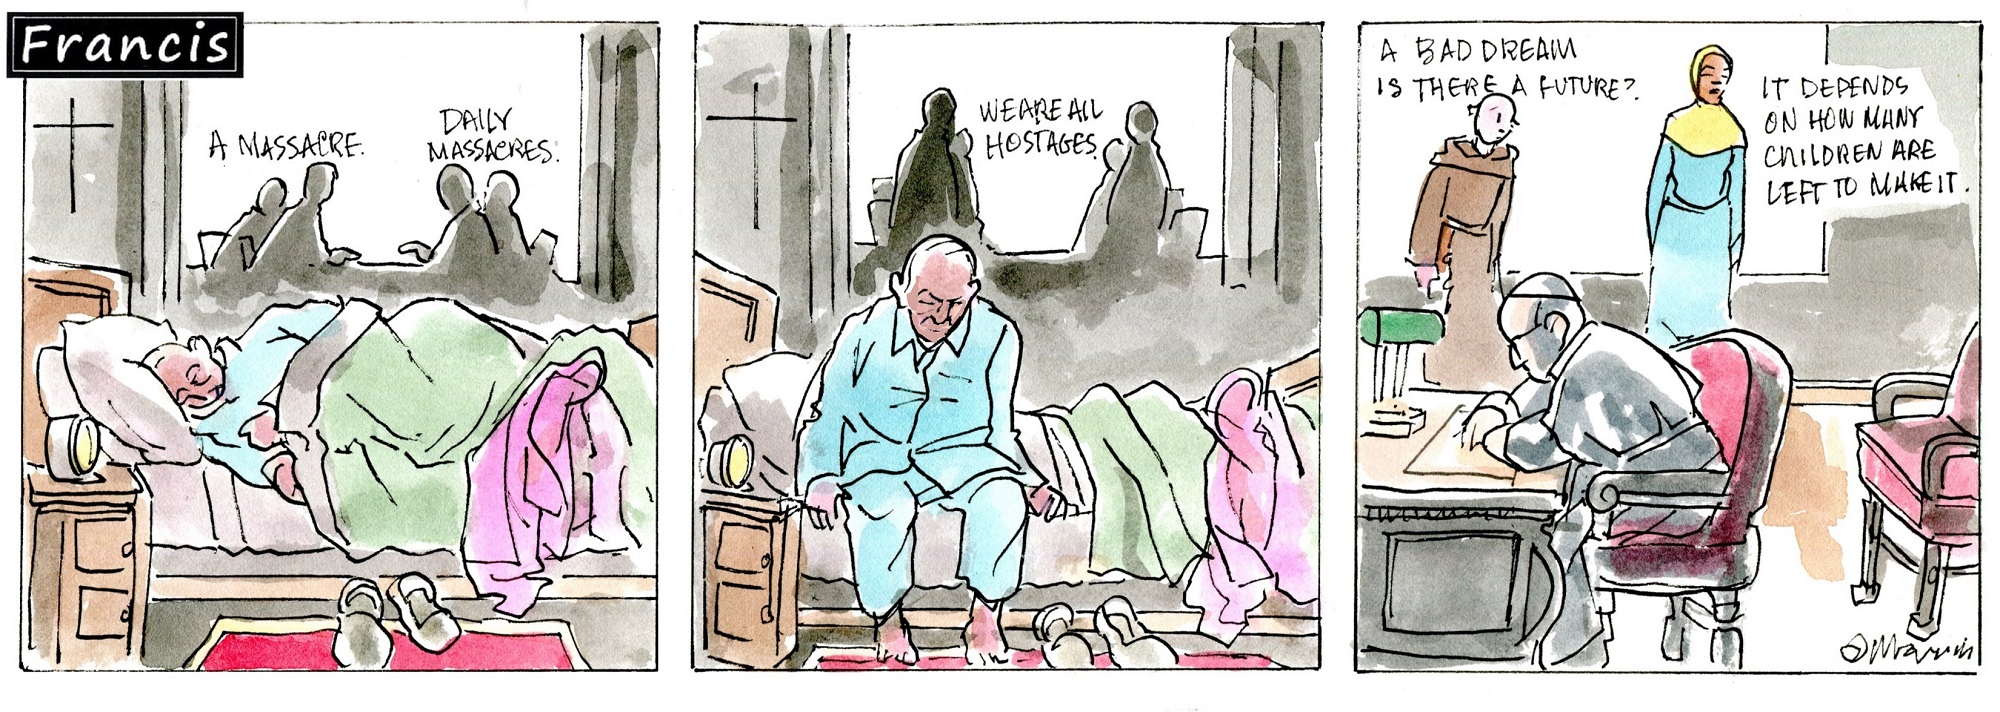 Francis, the comic strip: A bad dream leads to a bigger question. 